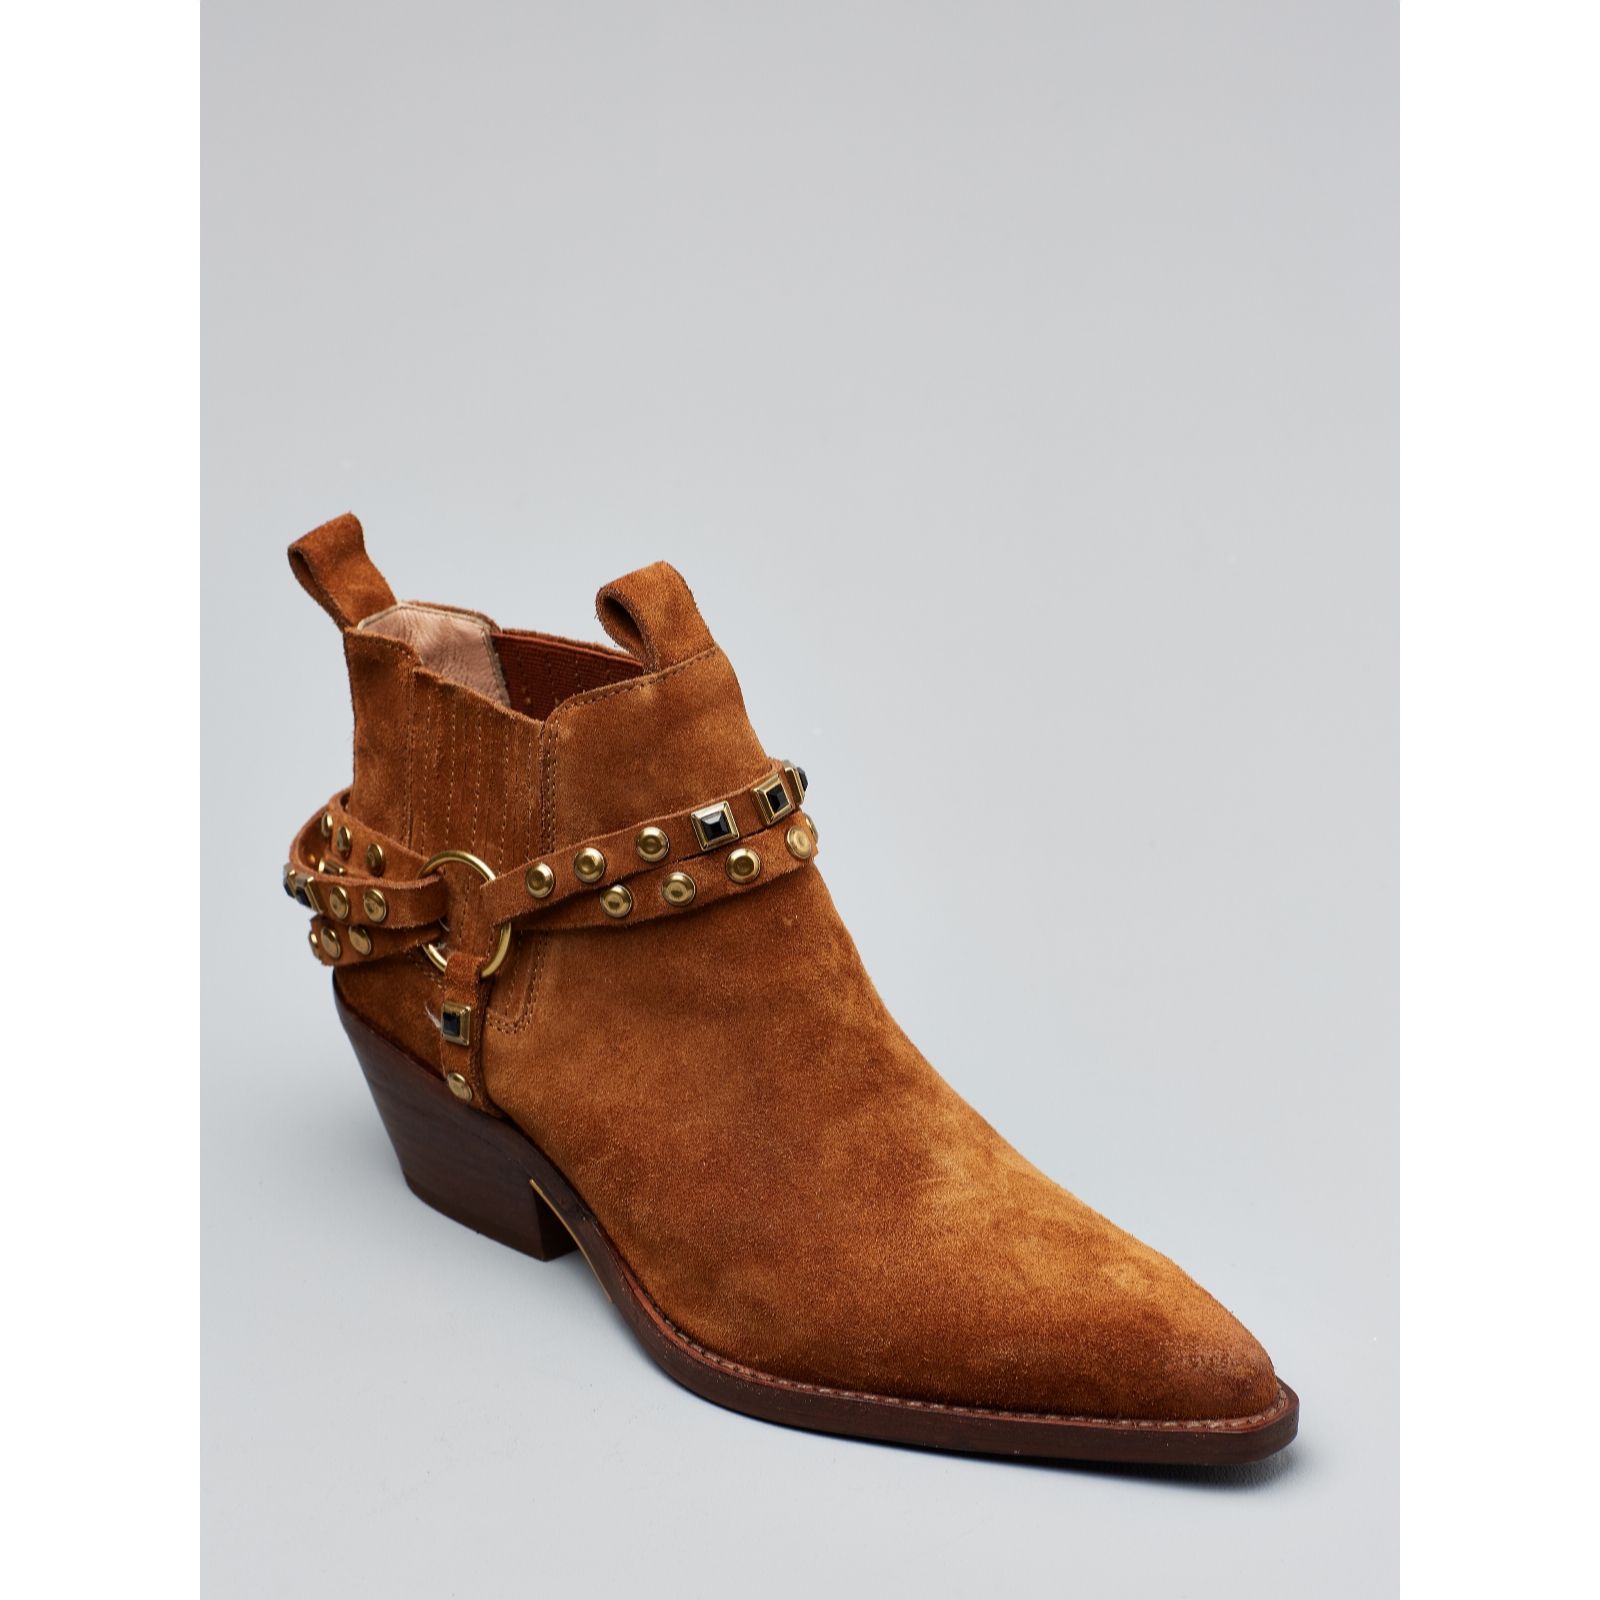 bronx ankle boots uk